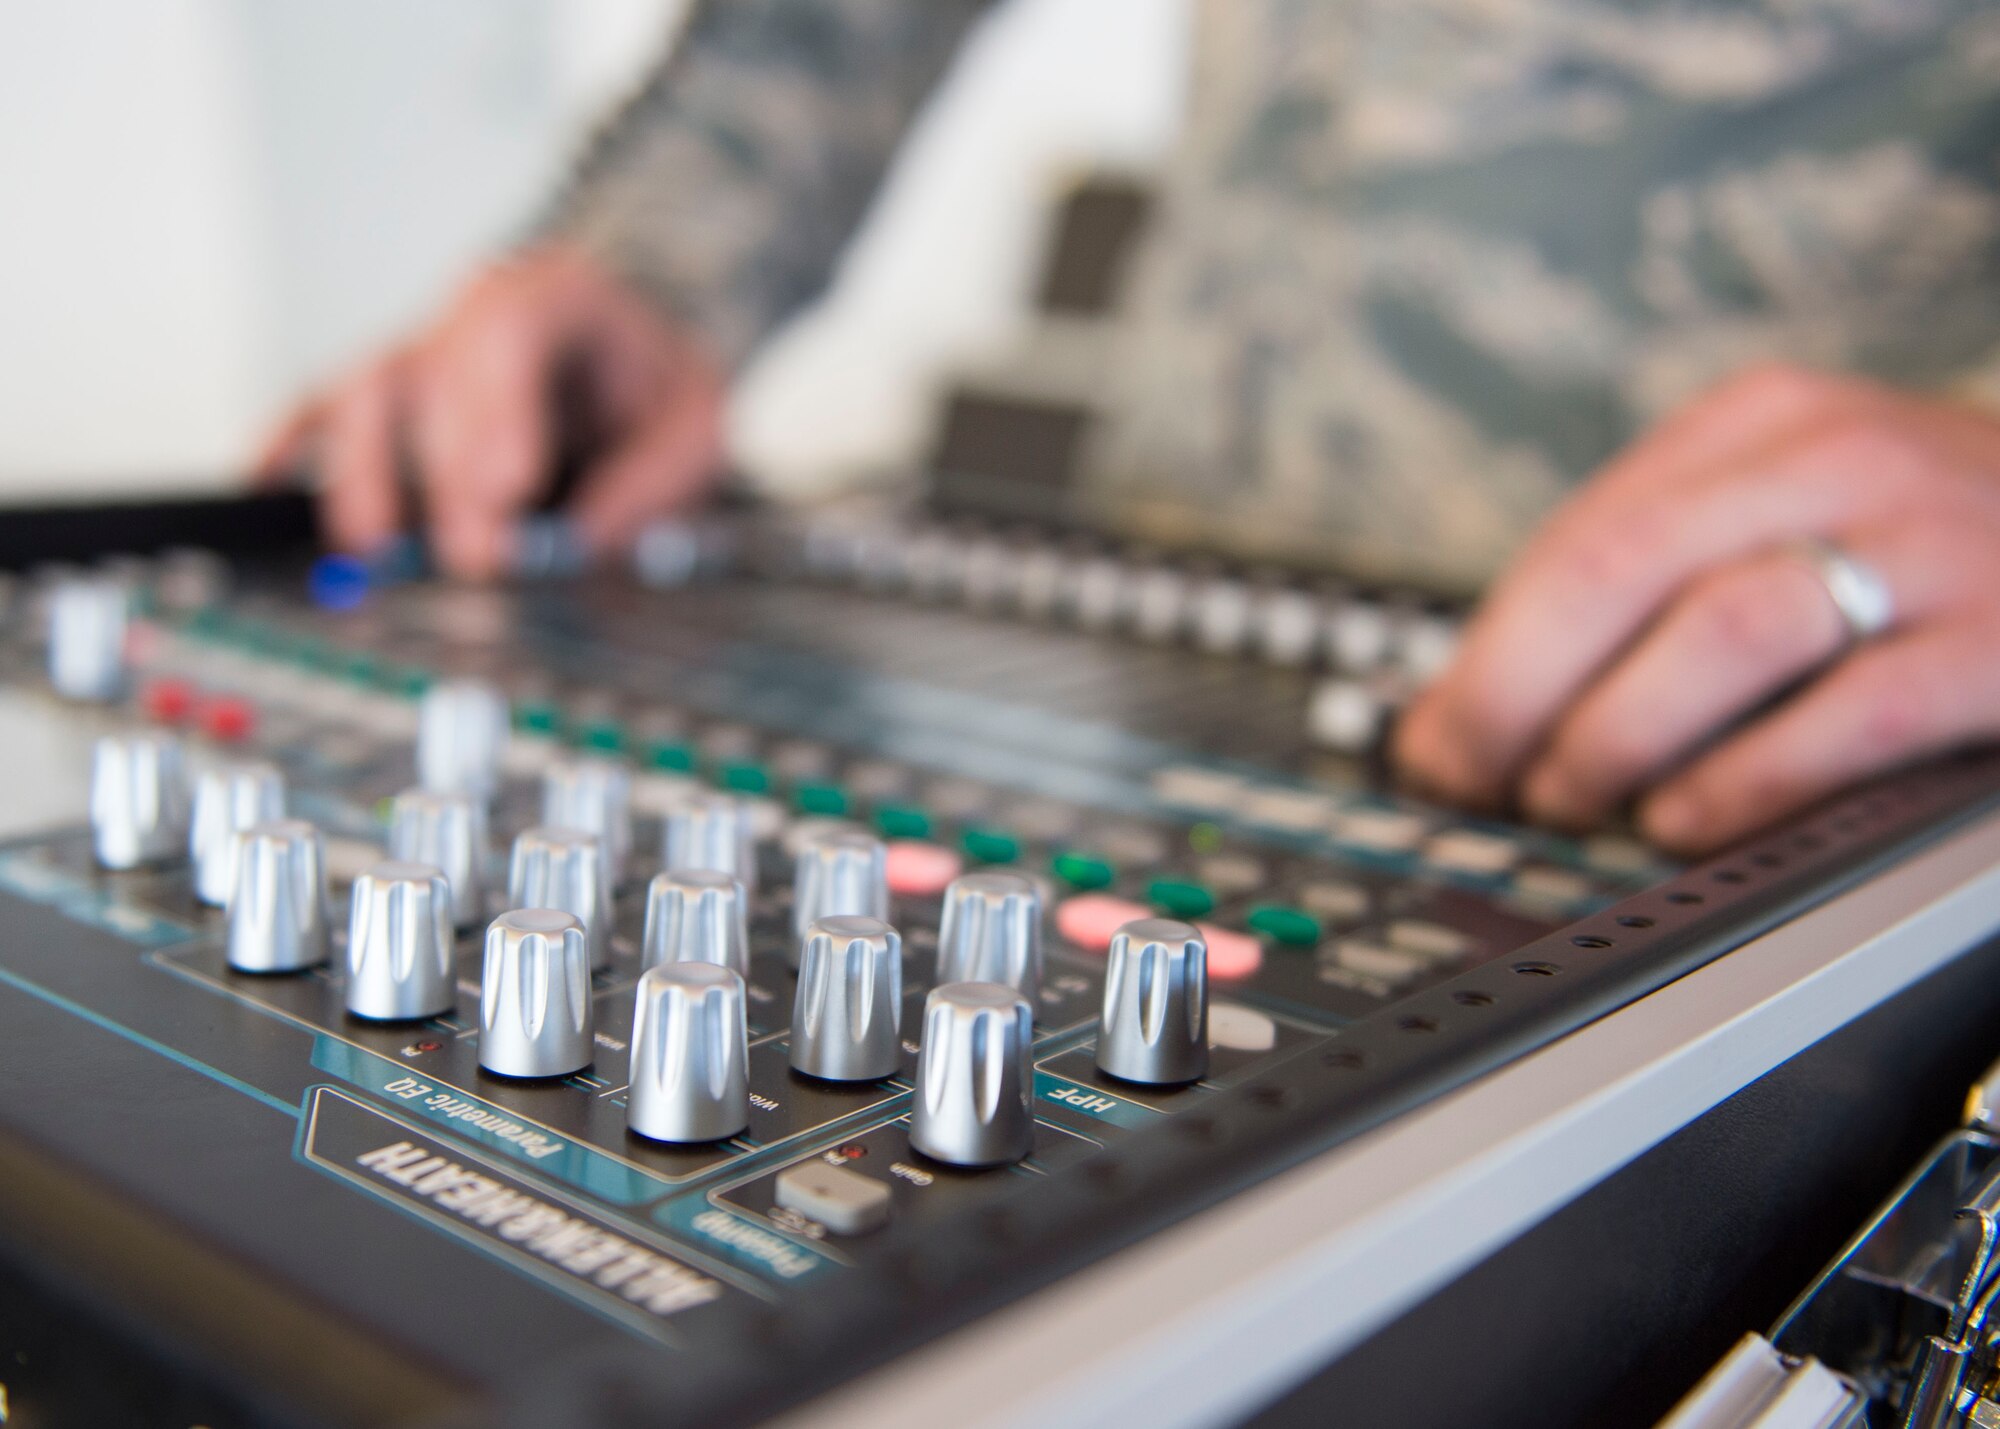 Staff Sgt. Andrew Muhlhahn, a radio frequency systems journeyman with the 1st Special Operations Communications Squadron, checks a sound production mixer prior to a change of command ceremony at the Freedom Hangar on Hurlburt Field, Fla., July 15, 2016. A sound production mixer allows volume control and other control access during an event. (U.S. Air Force photo by Senior Airman Krystal M. Garrett) 